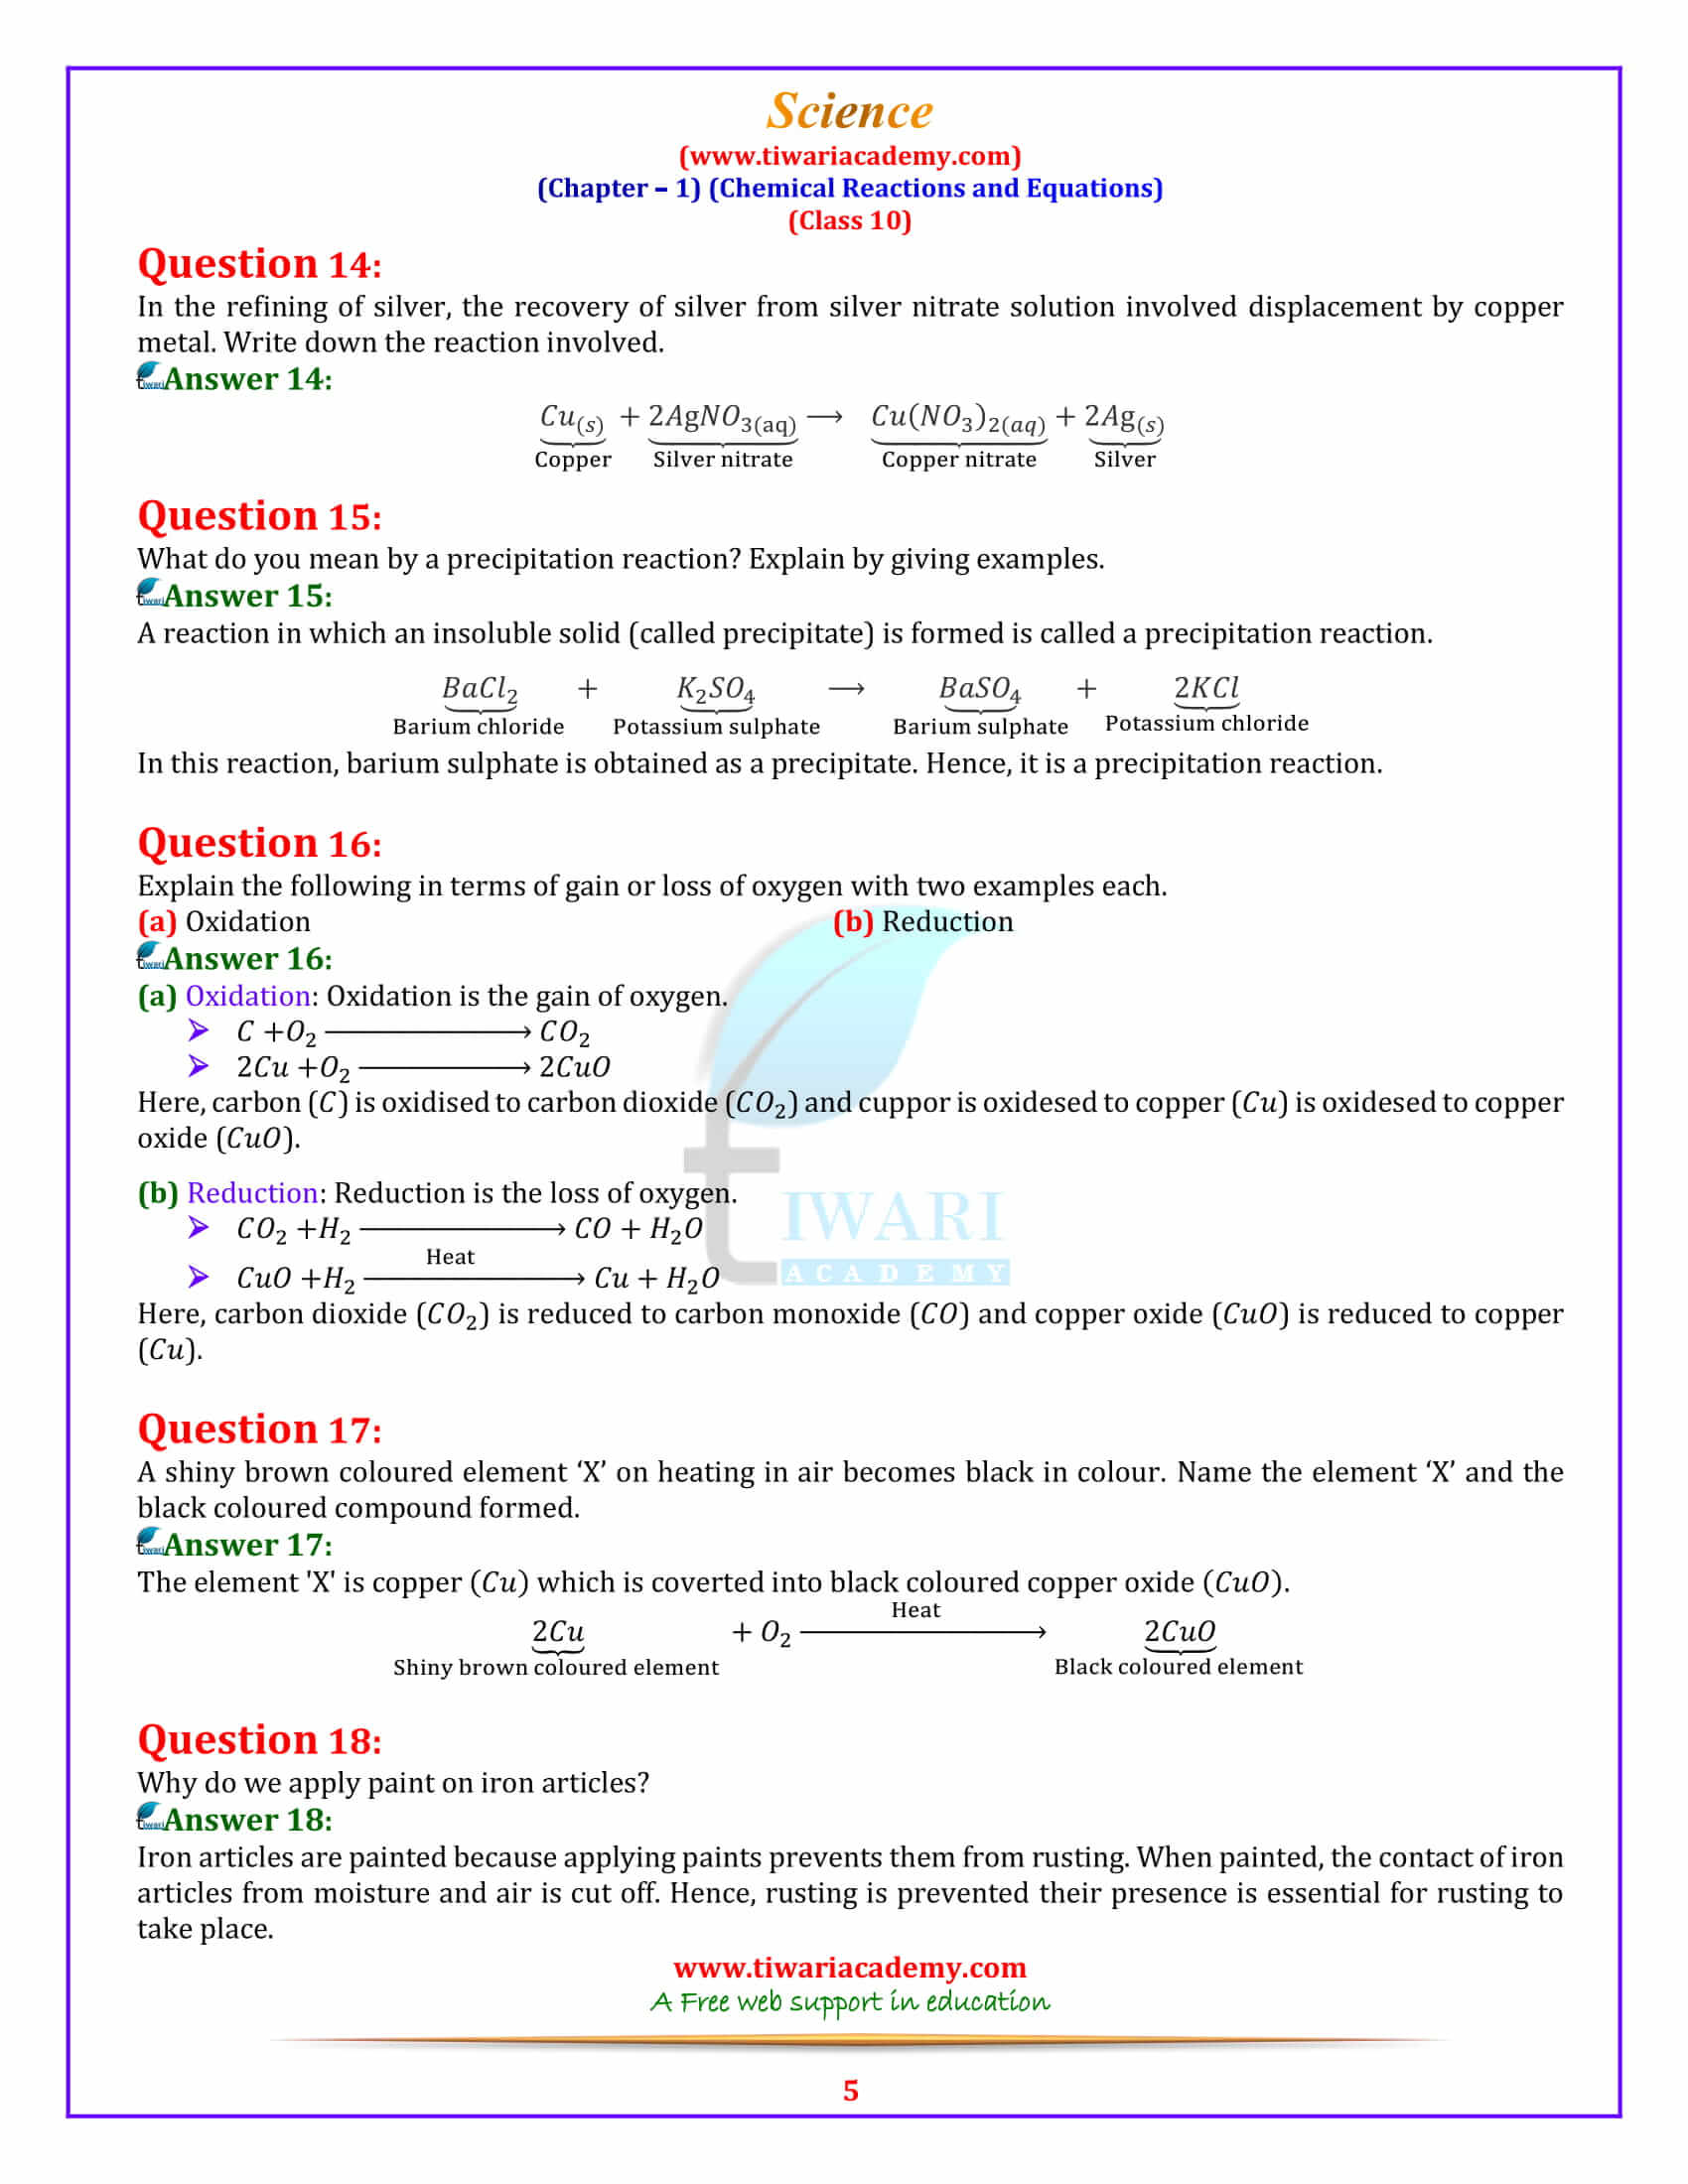 class 10 chapter 1 case study questions science